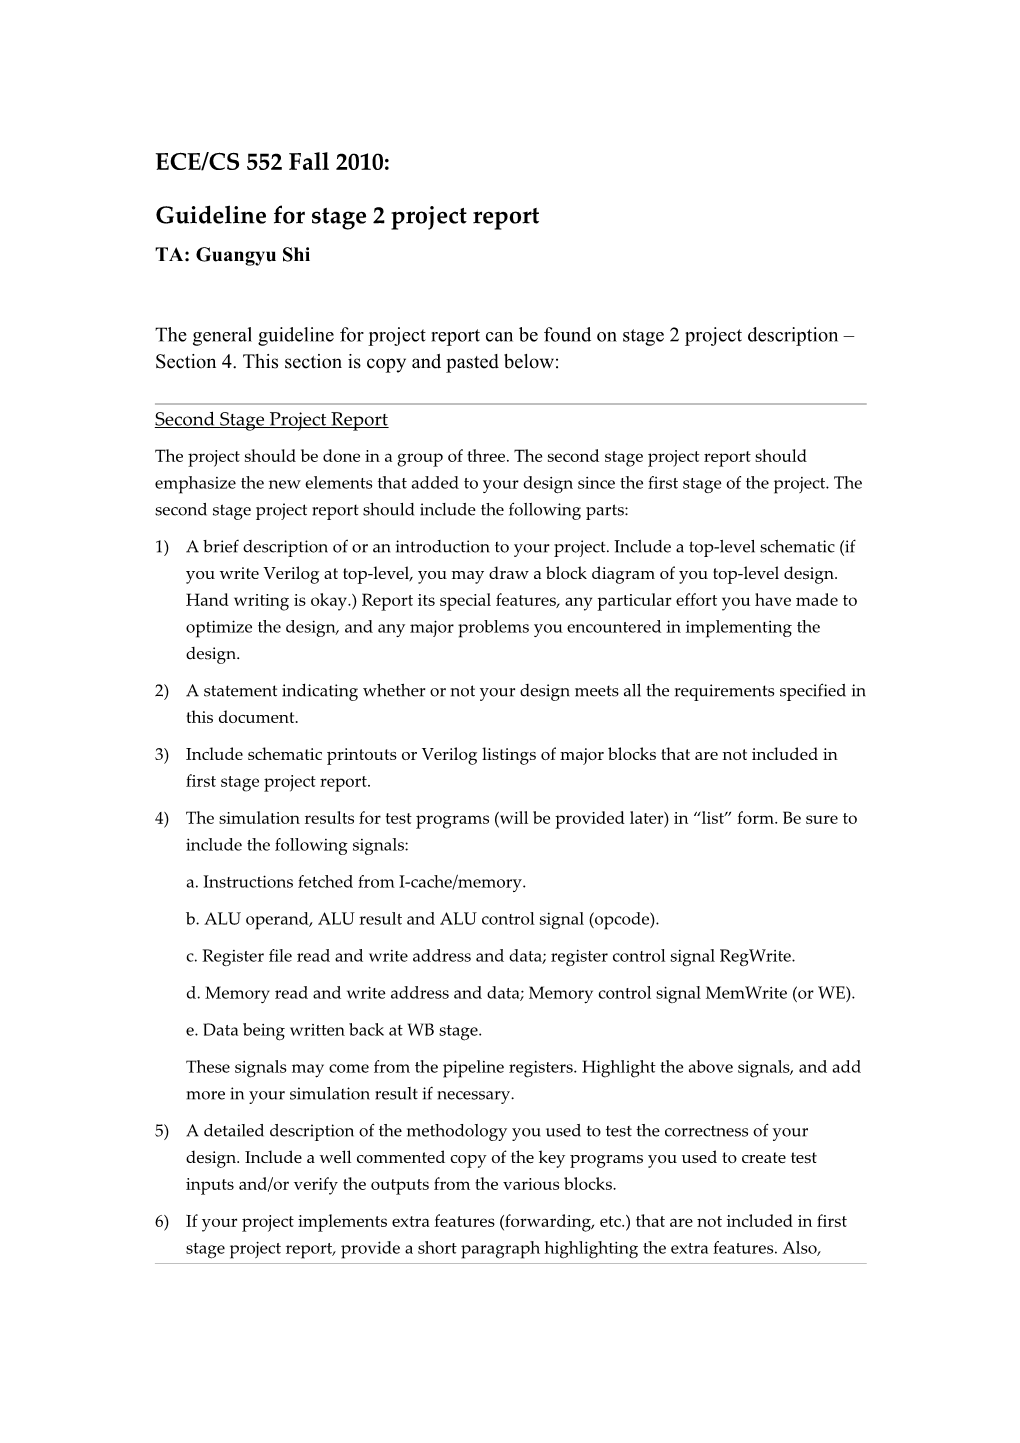 Guideline for Stage 2 Project Report